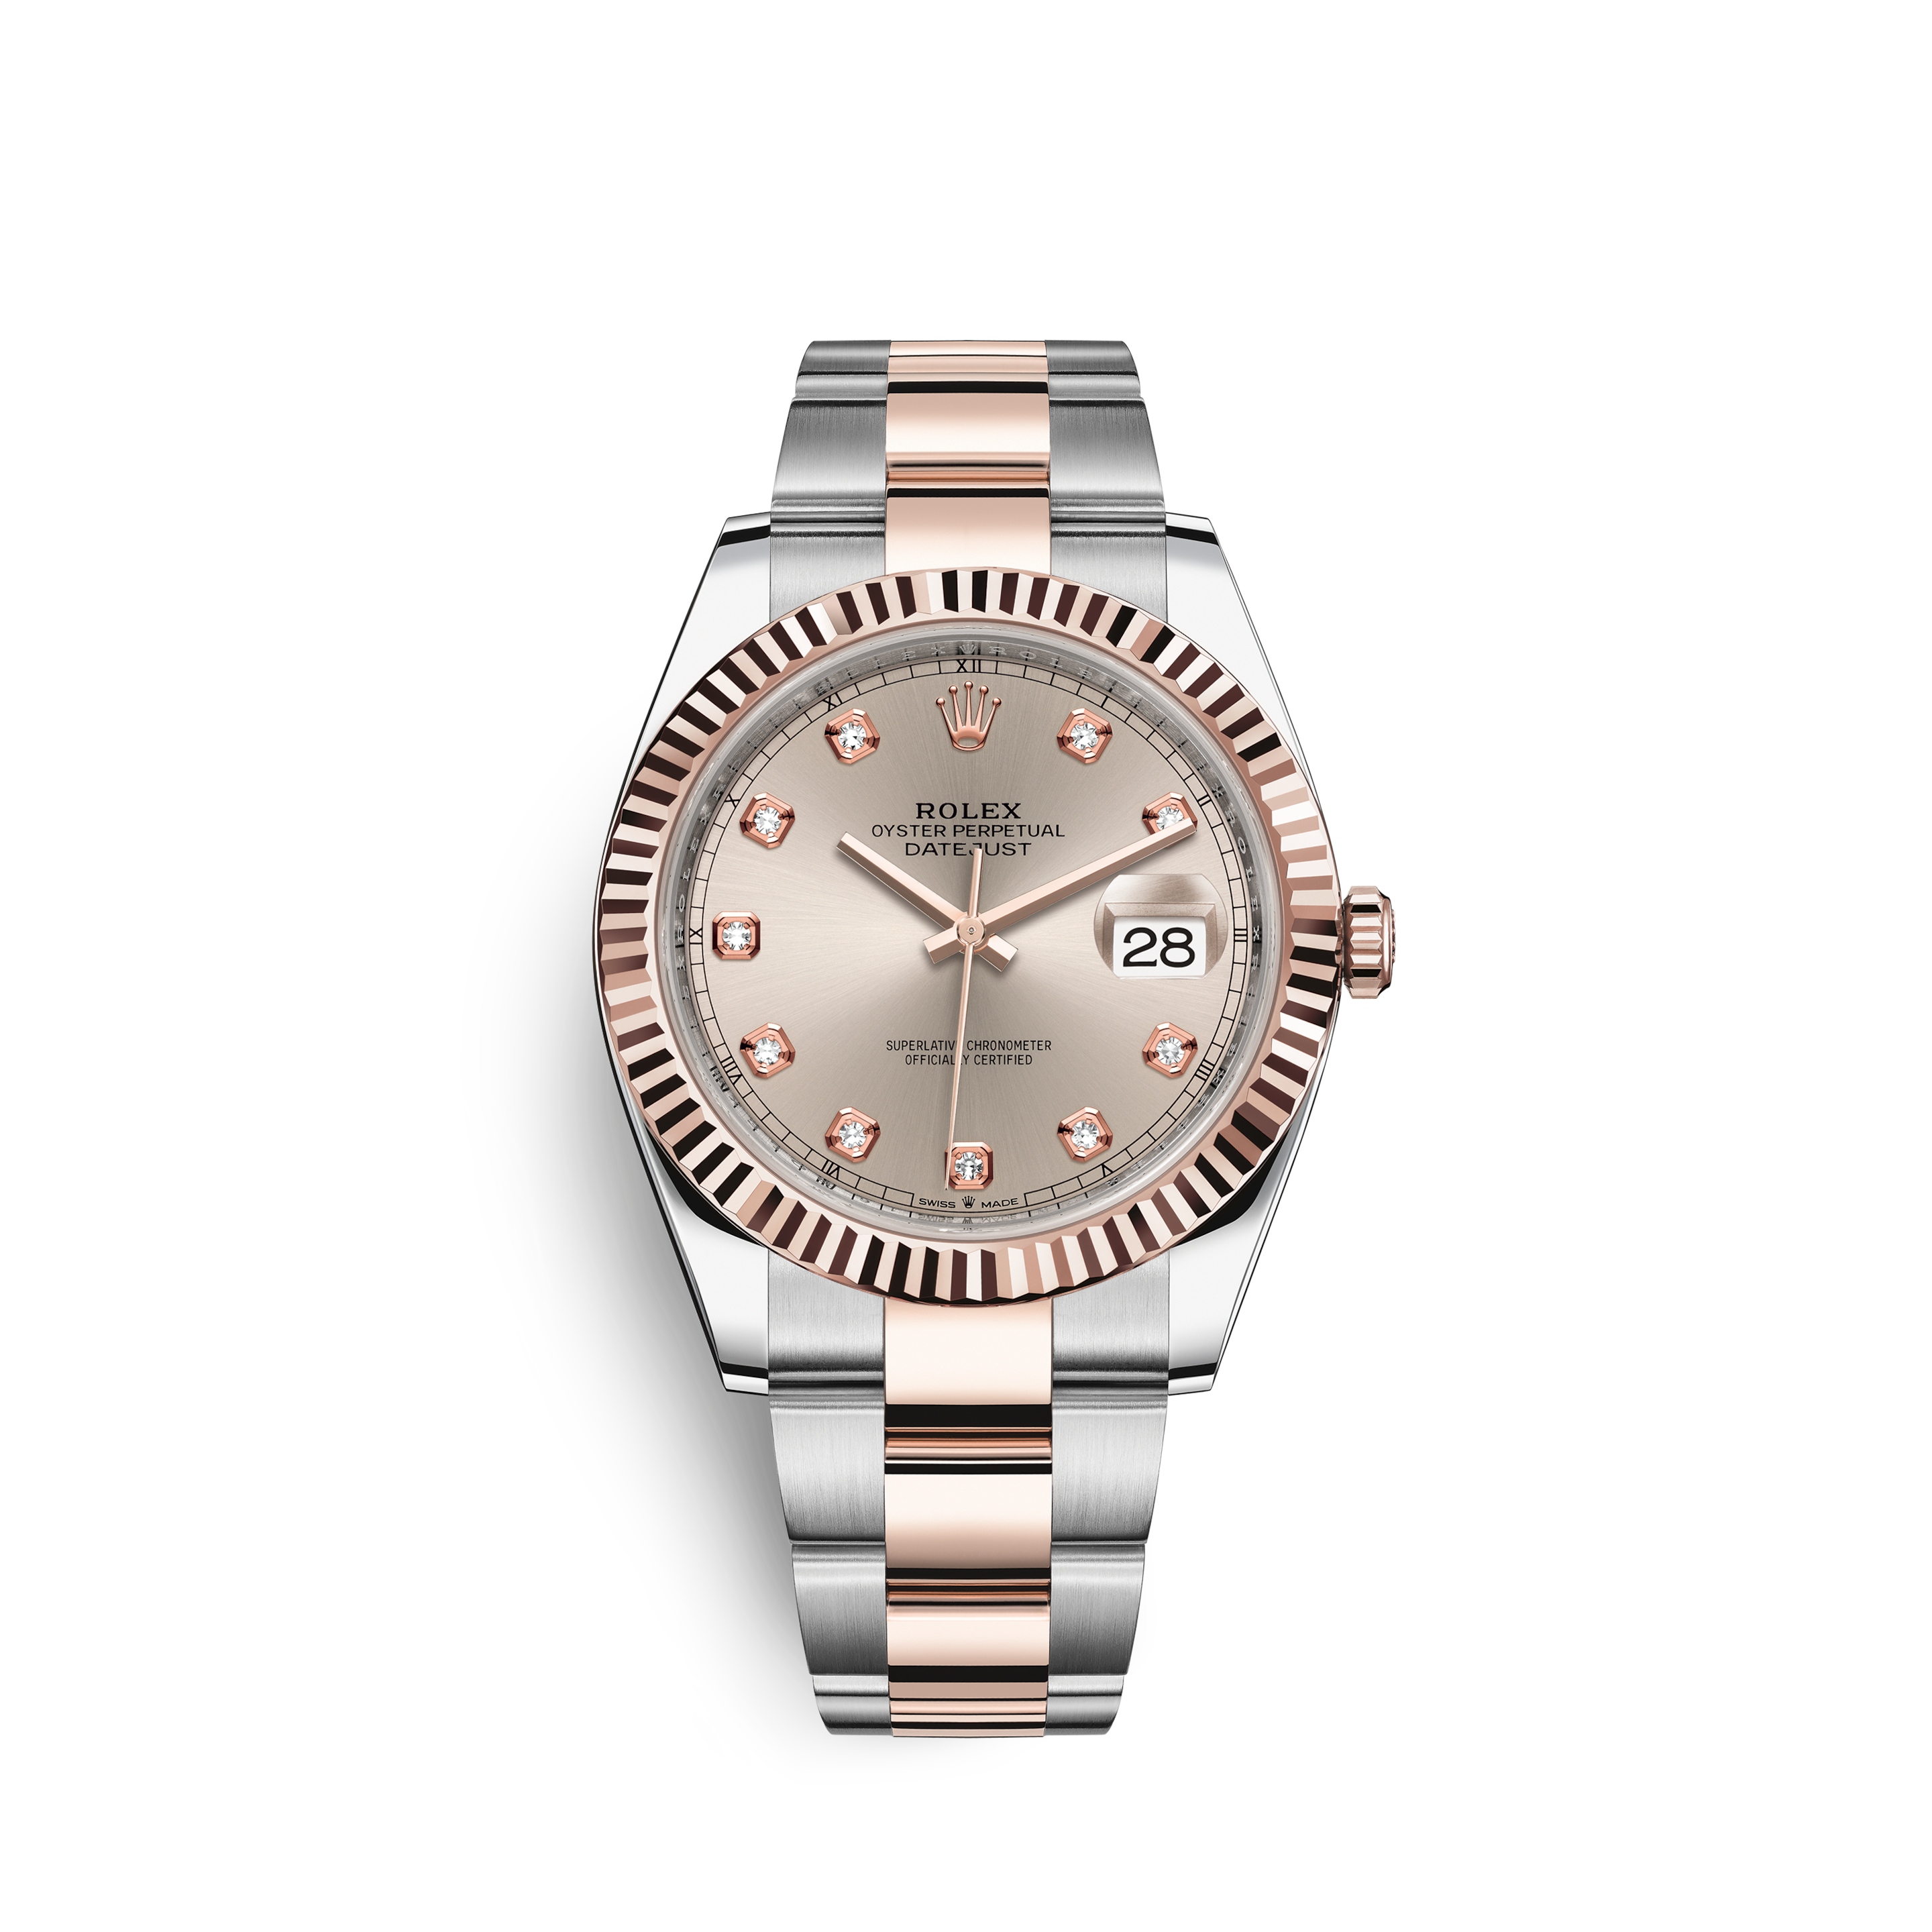 rolex oyster datejust superlative chronometer officially certified